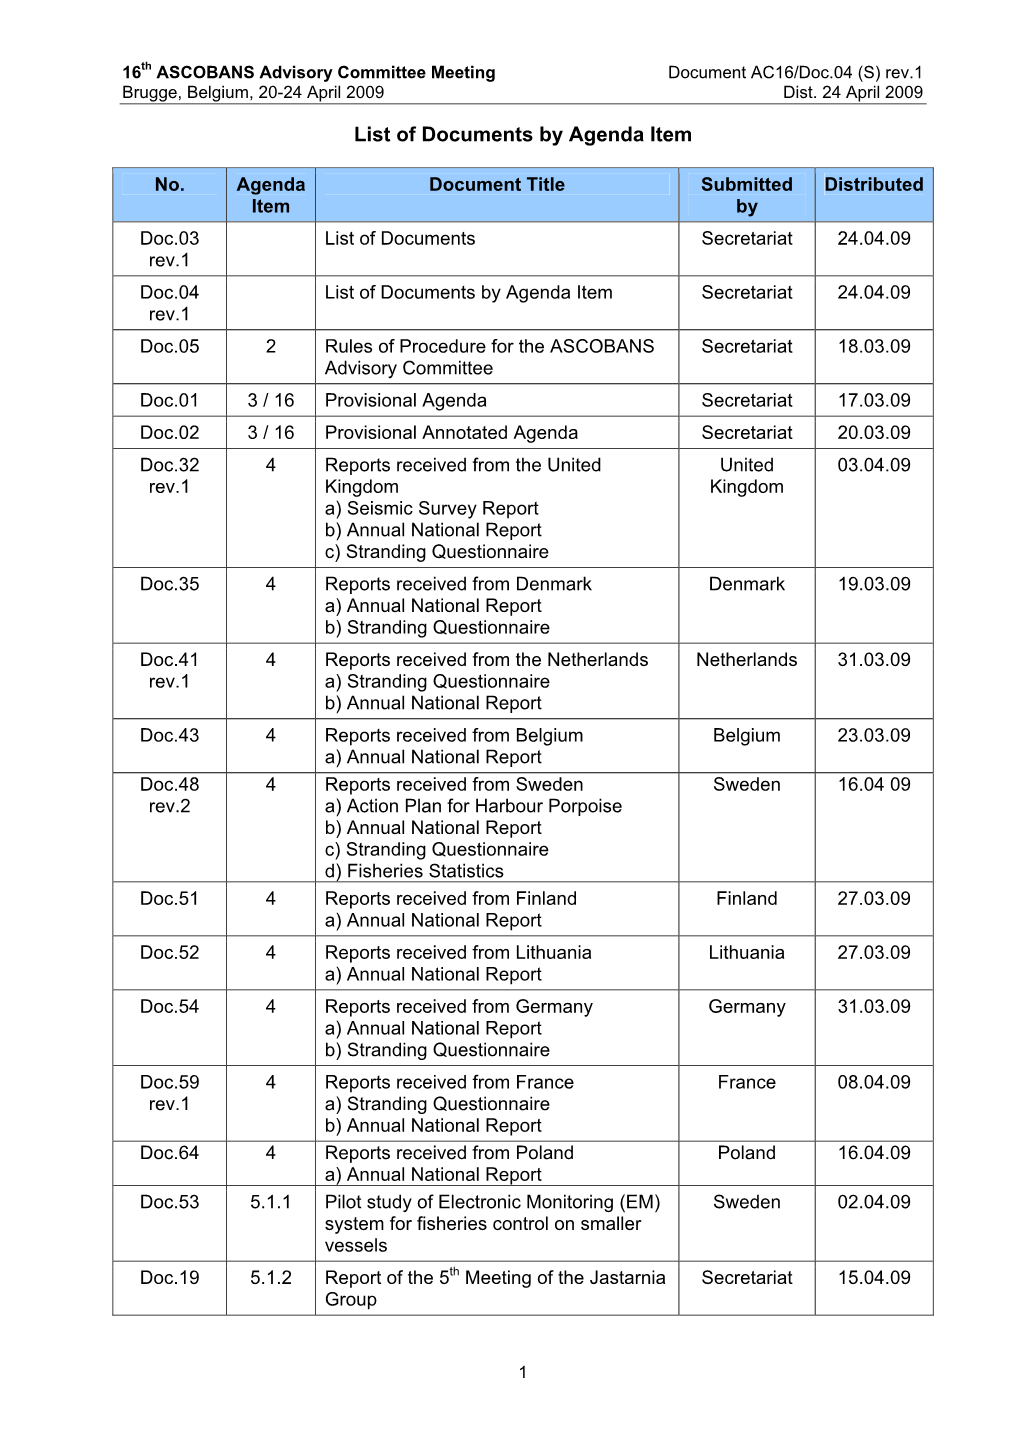 List of Documents by Agenda Item